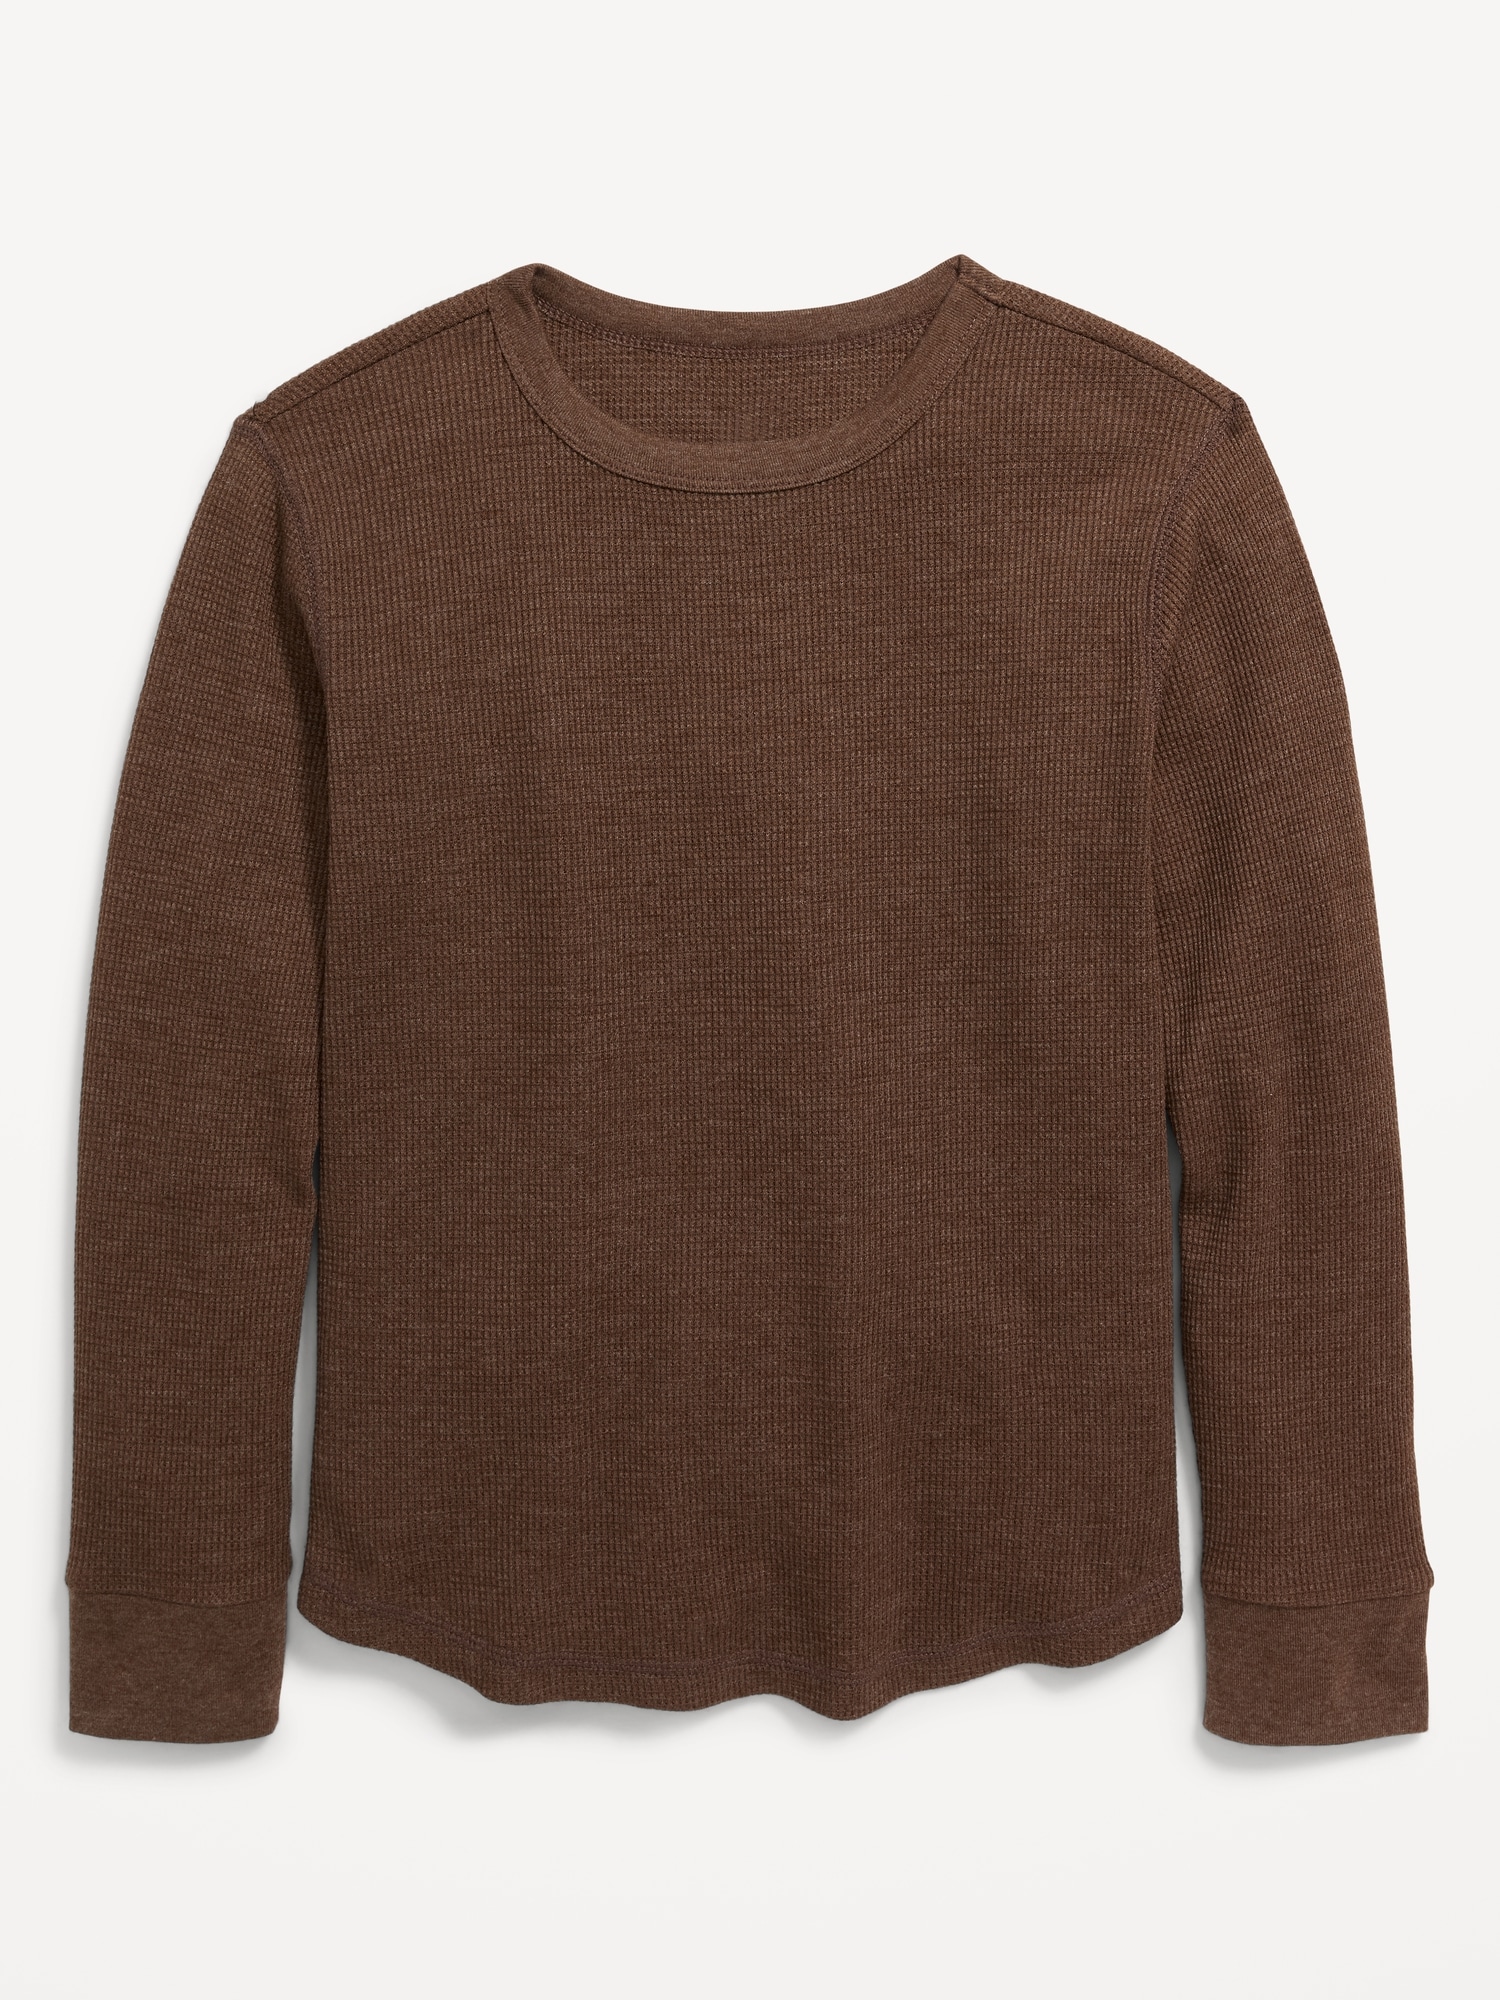 Long-Sleeve Thermal-Knit T-Shirt for Boys